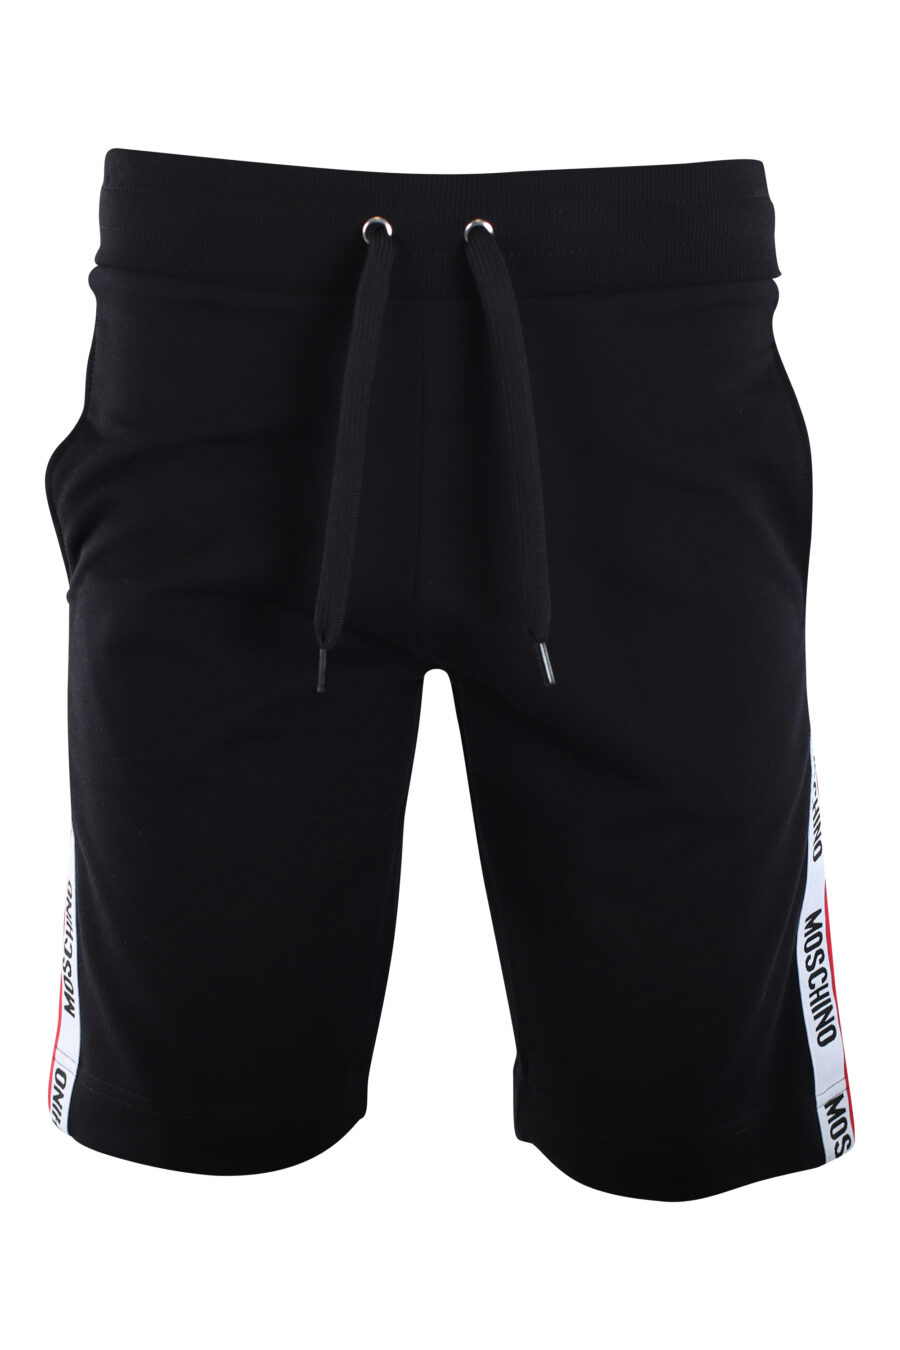 Tracksuit bottoms black with side logos "underbear" - IMG 2234